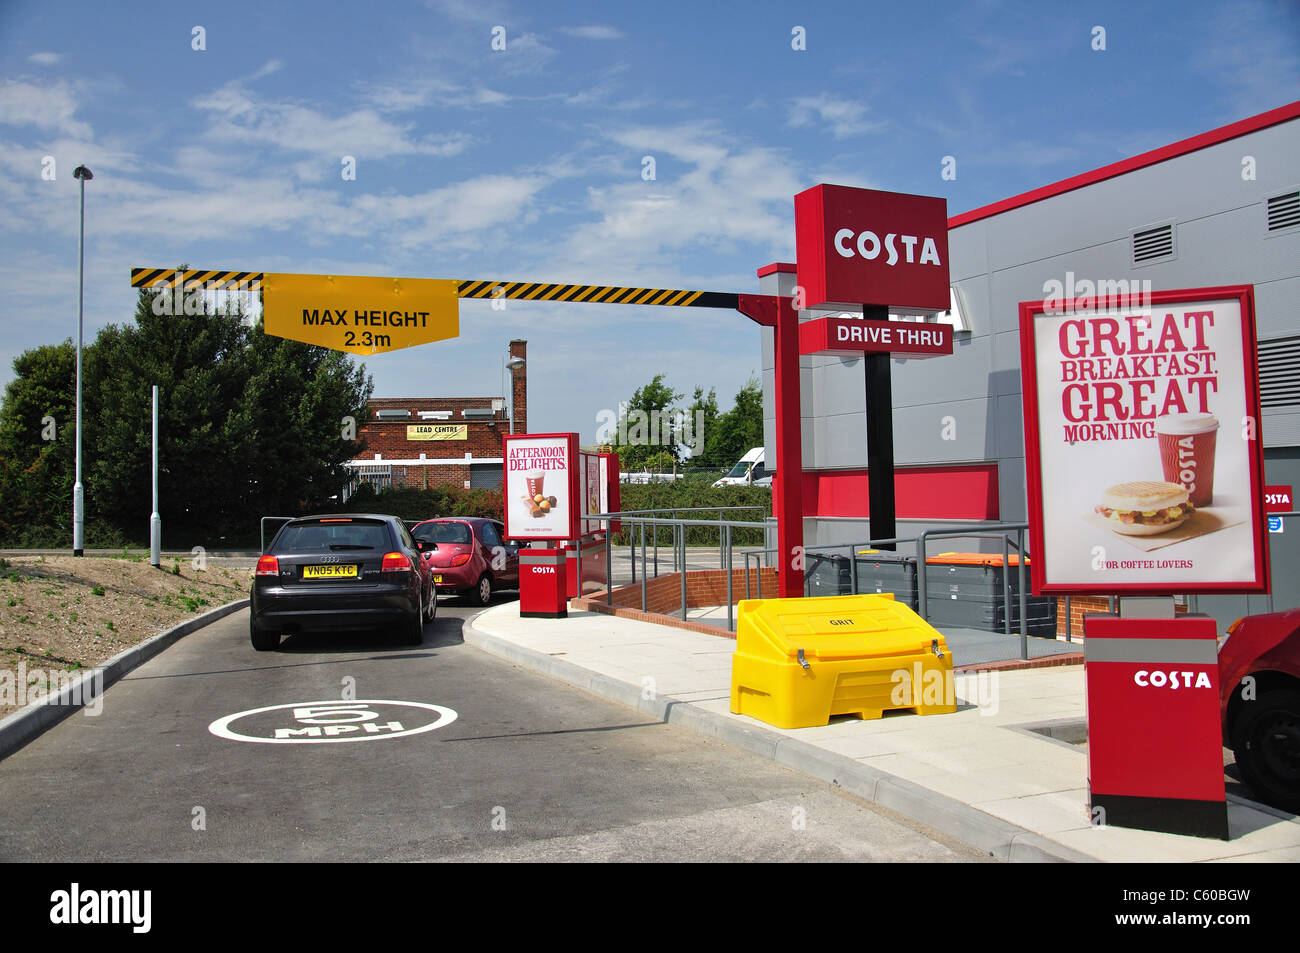 Drive thru Costa Coffee, Westwood Retail Park, Broadstairs, Isle of Thanet, Thanet District, Kent, England, United Kingdom Stock Photo